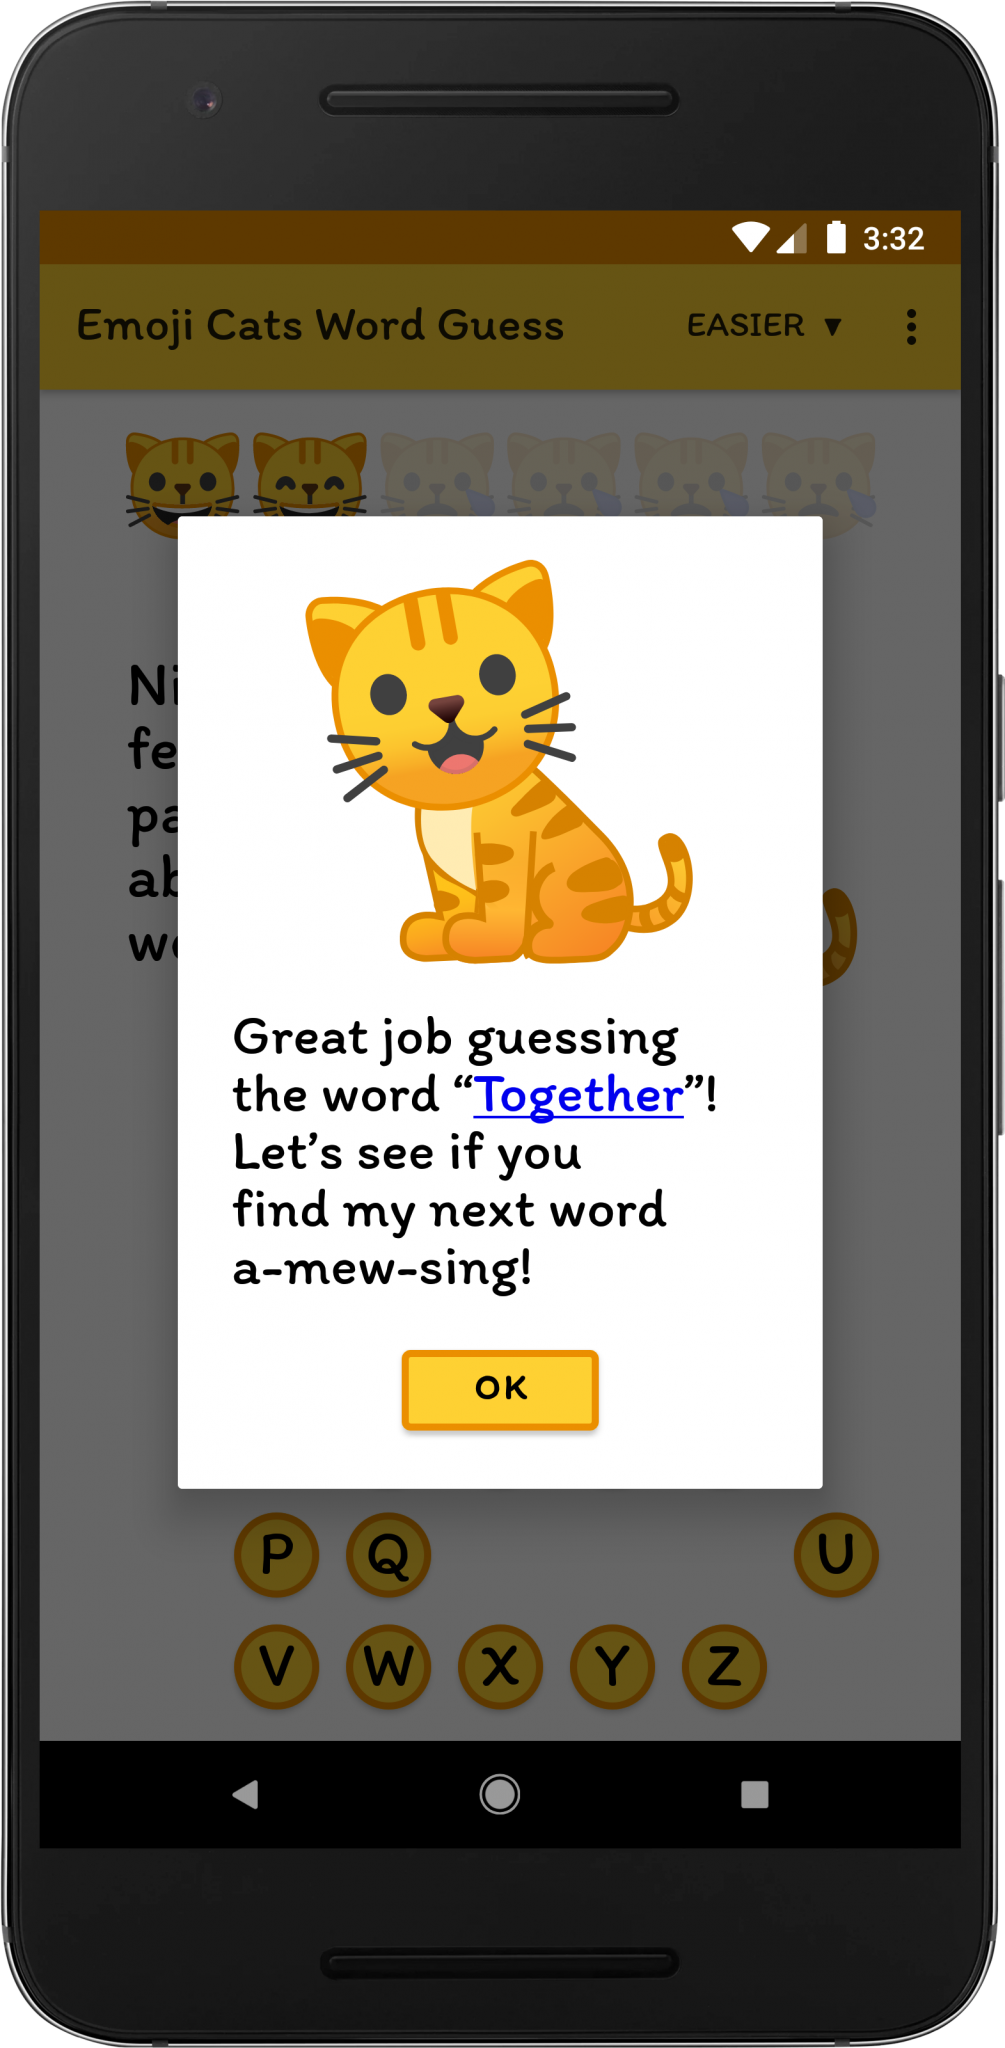 Emoji Cats Word Guess – Got a minute? Guess a word! Now is the purrfect